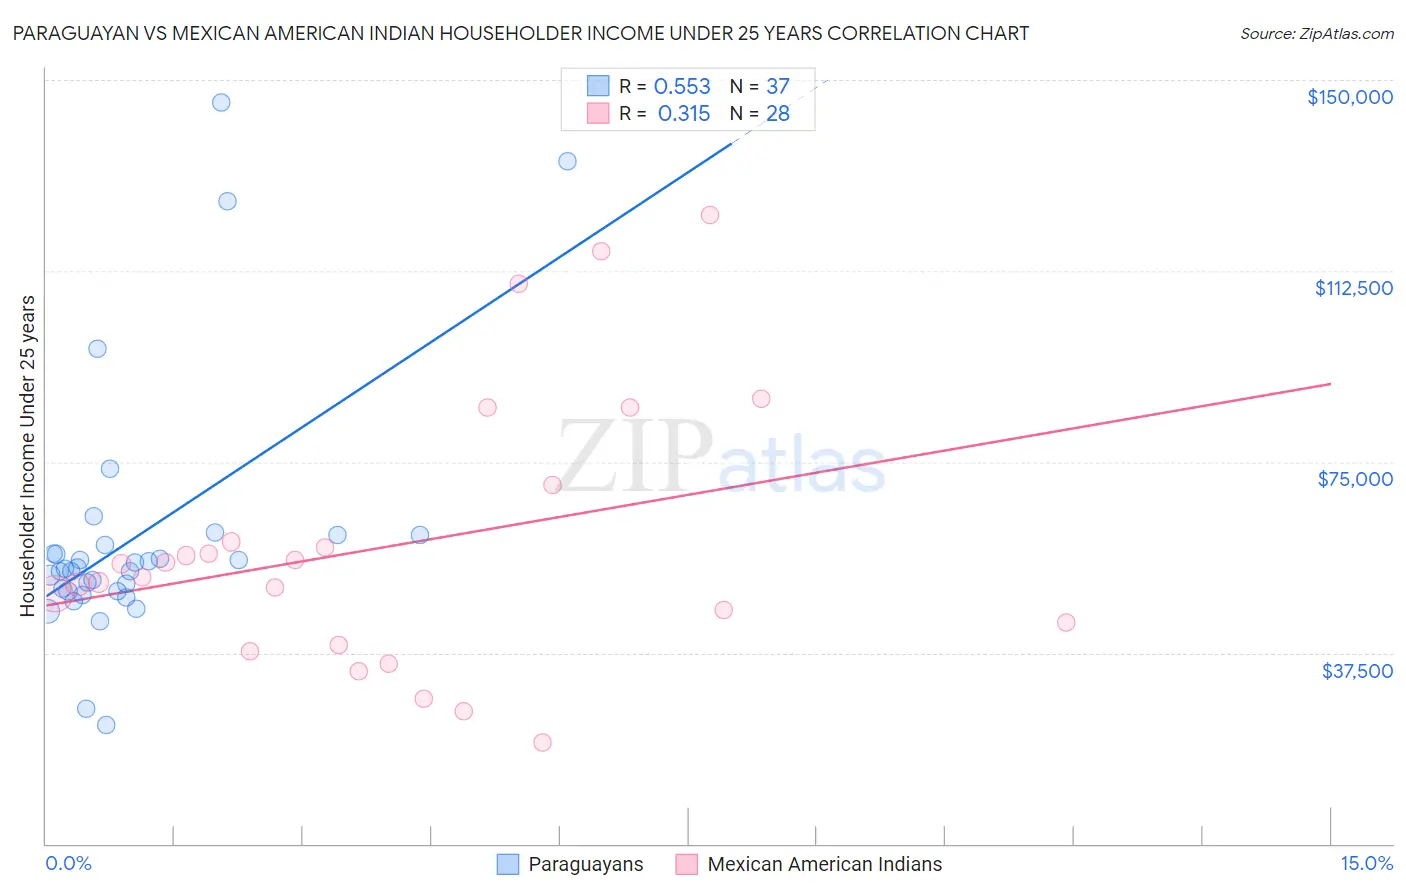 Paraguayan vs Mexican American Indian Householder Income Under 25 years